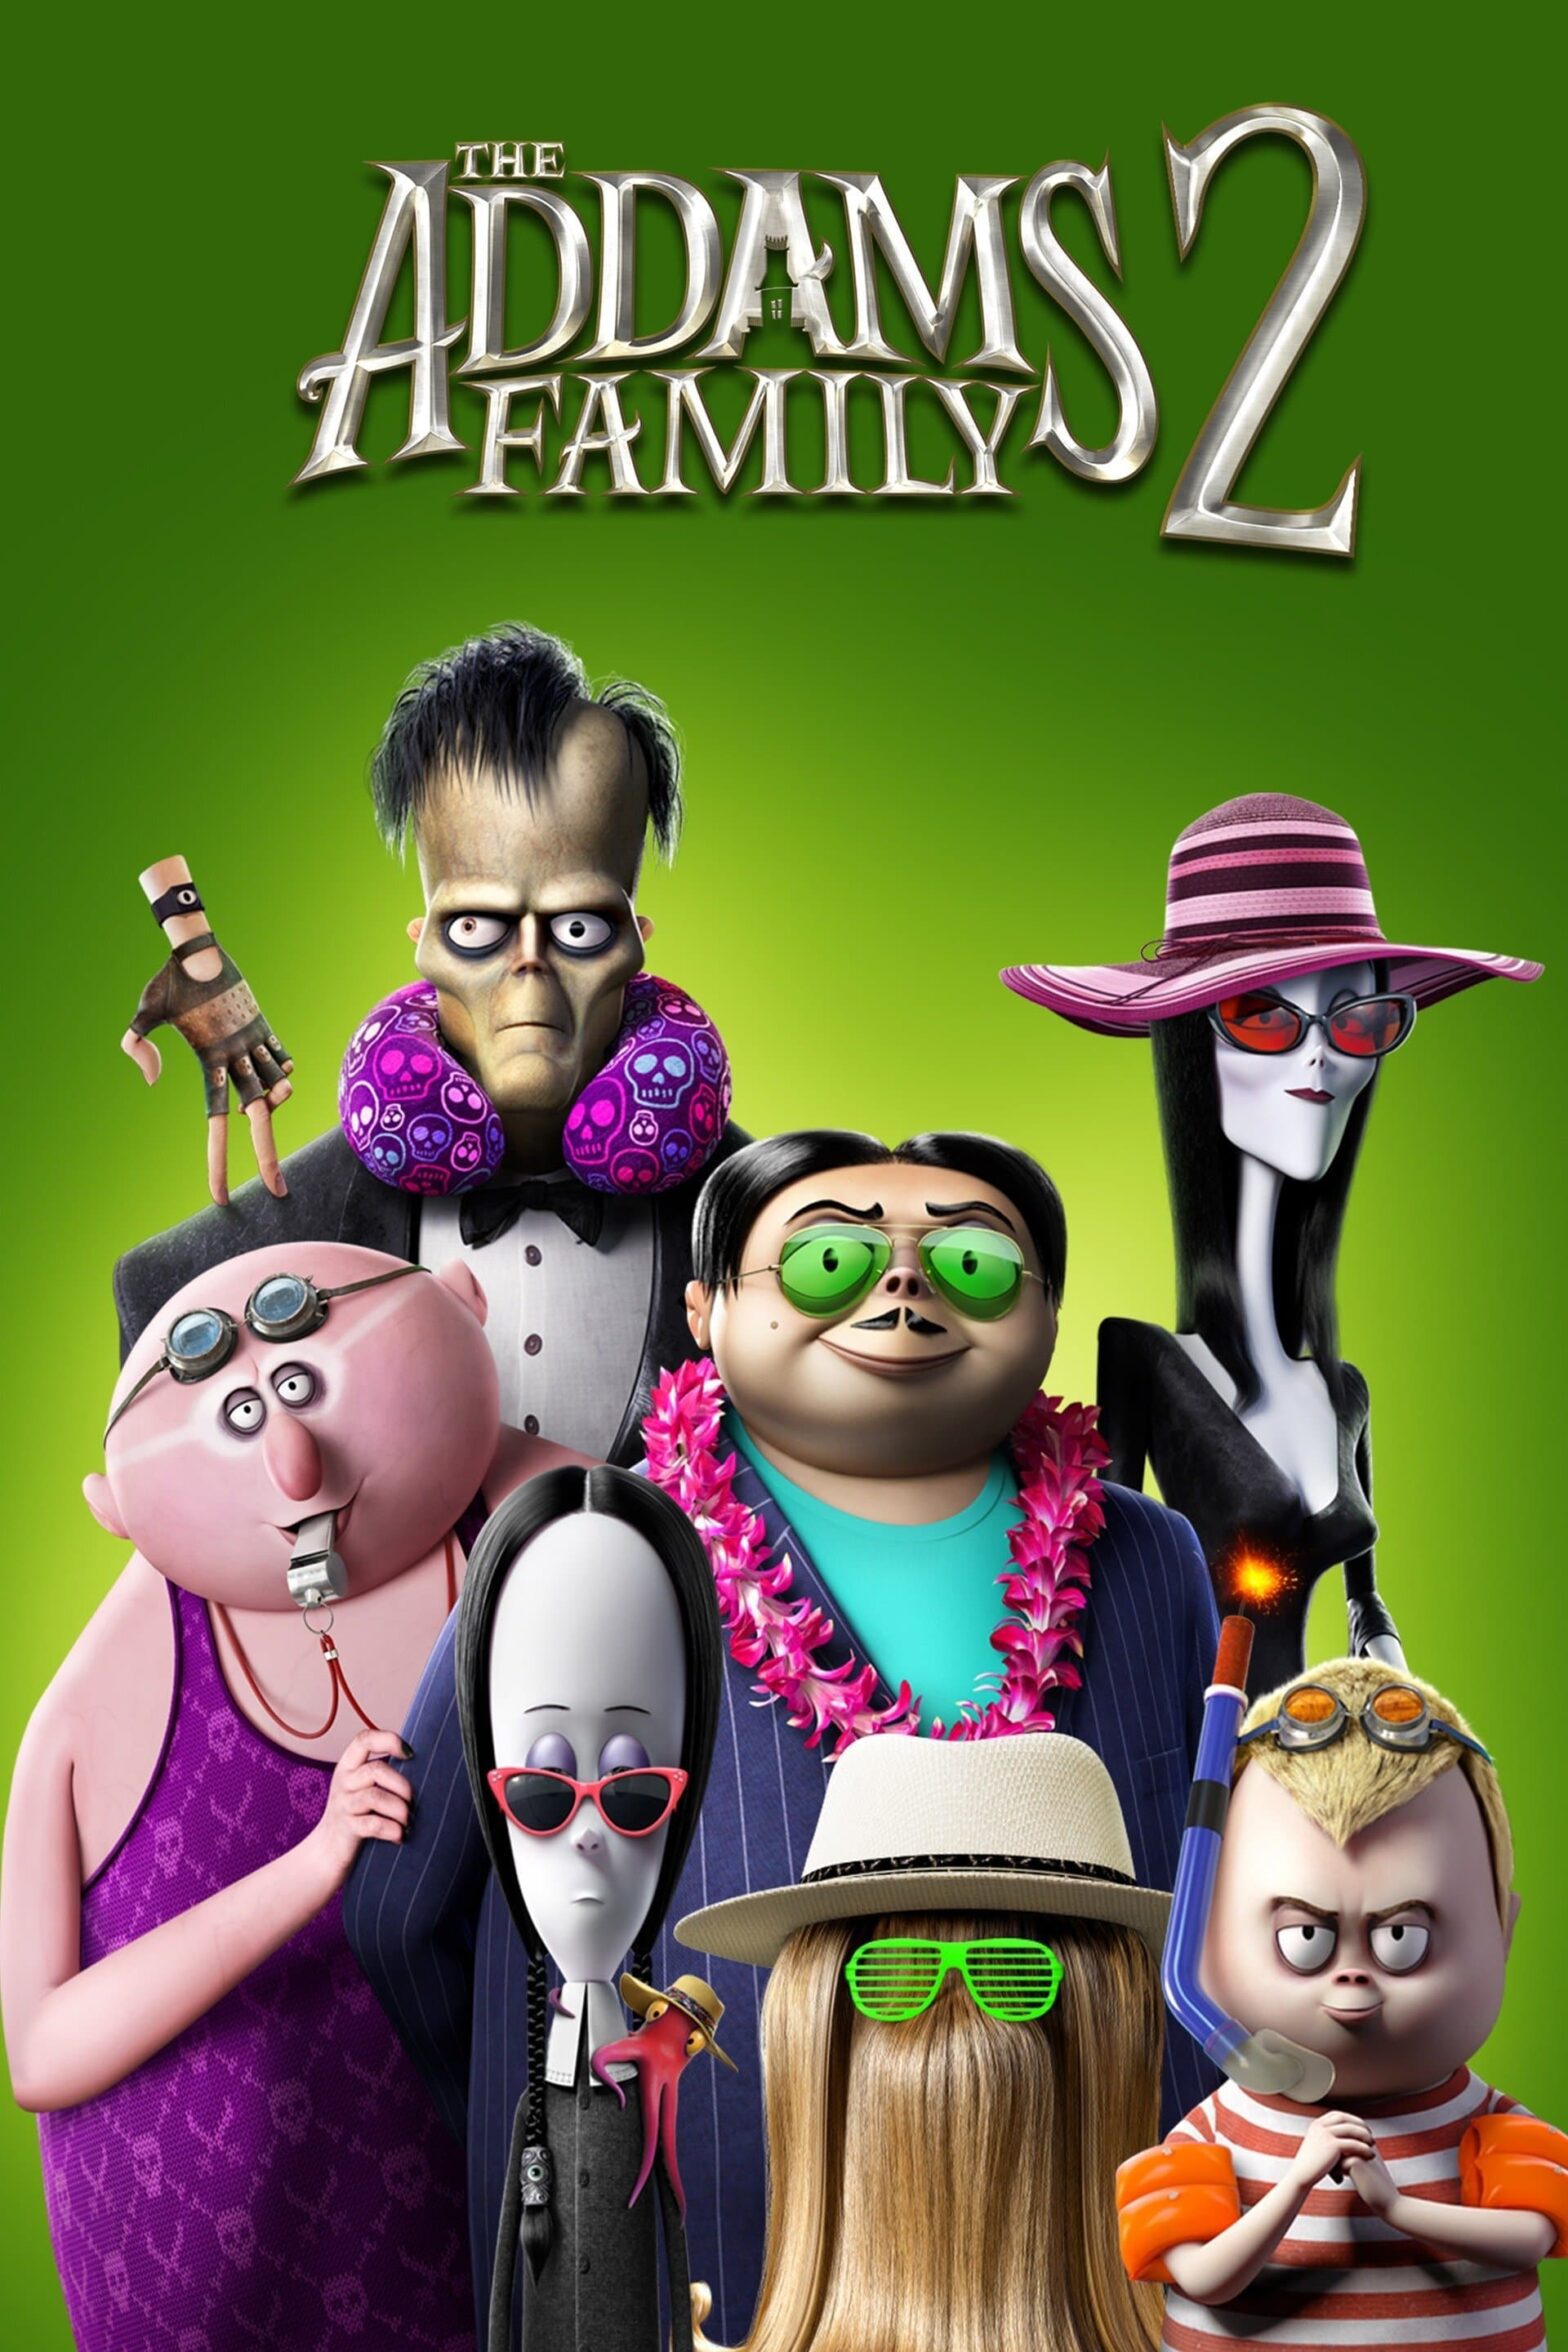 Poster for the movie "The Addams Family 2"